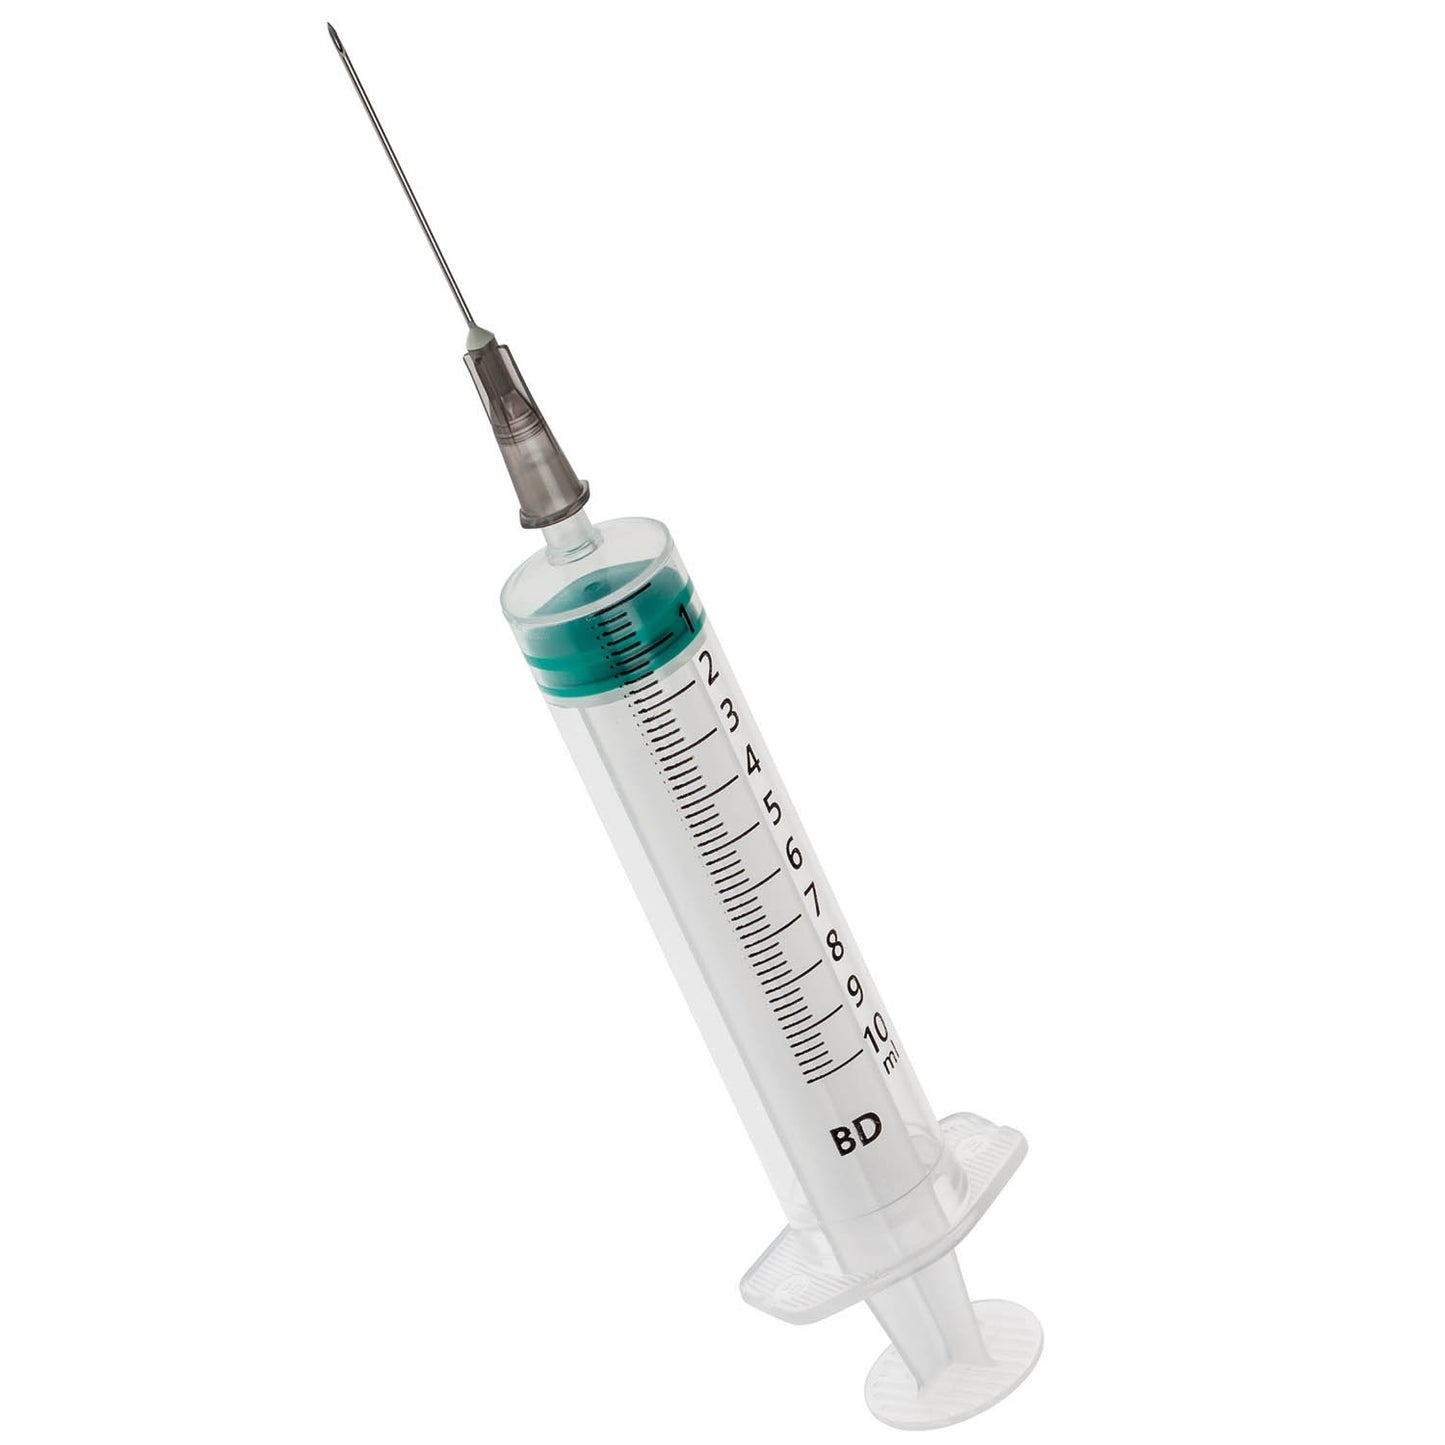 BD Emerald 10ml Syringe with 22G x 1 1/4" Needle - pack of 100